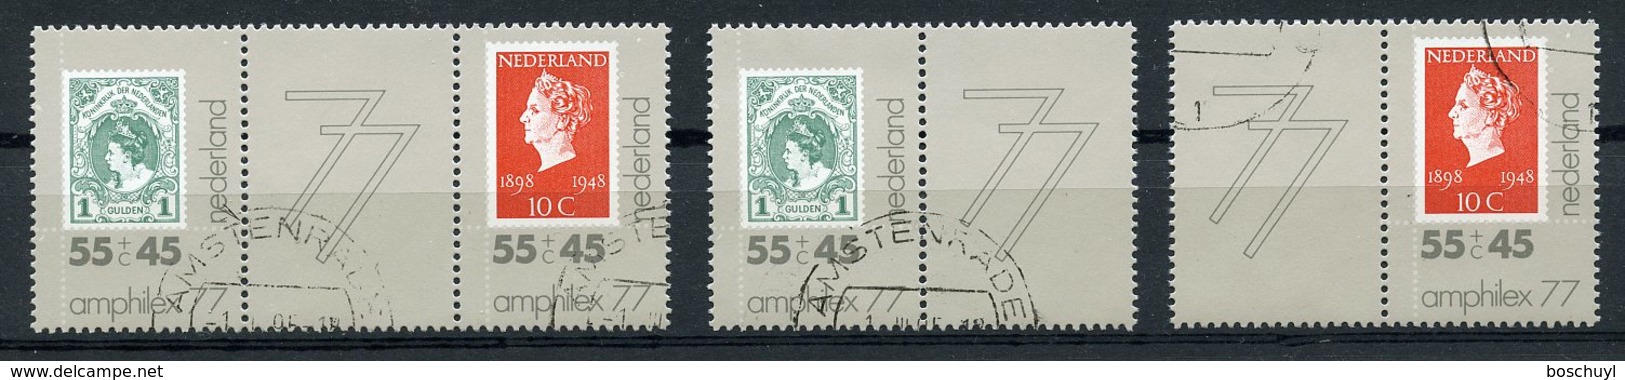 Netherlands, 1977, Amphilex Stamp Exhibition, Combinations From Sheet, Used, Michel 1101, 1104 - Usados